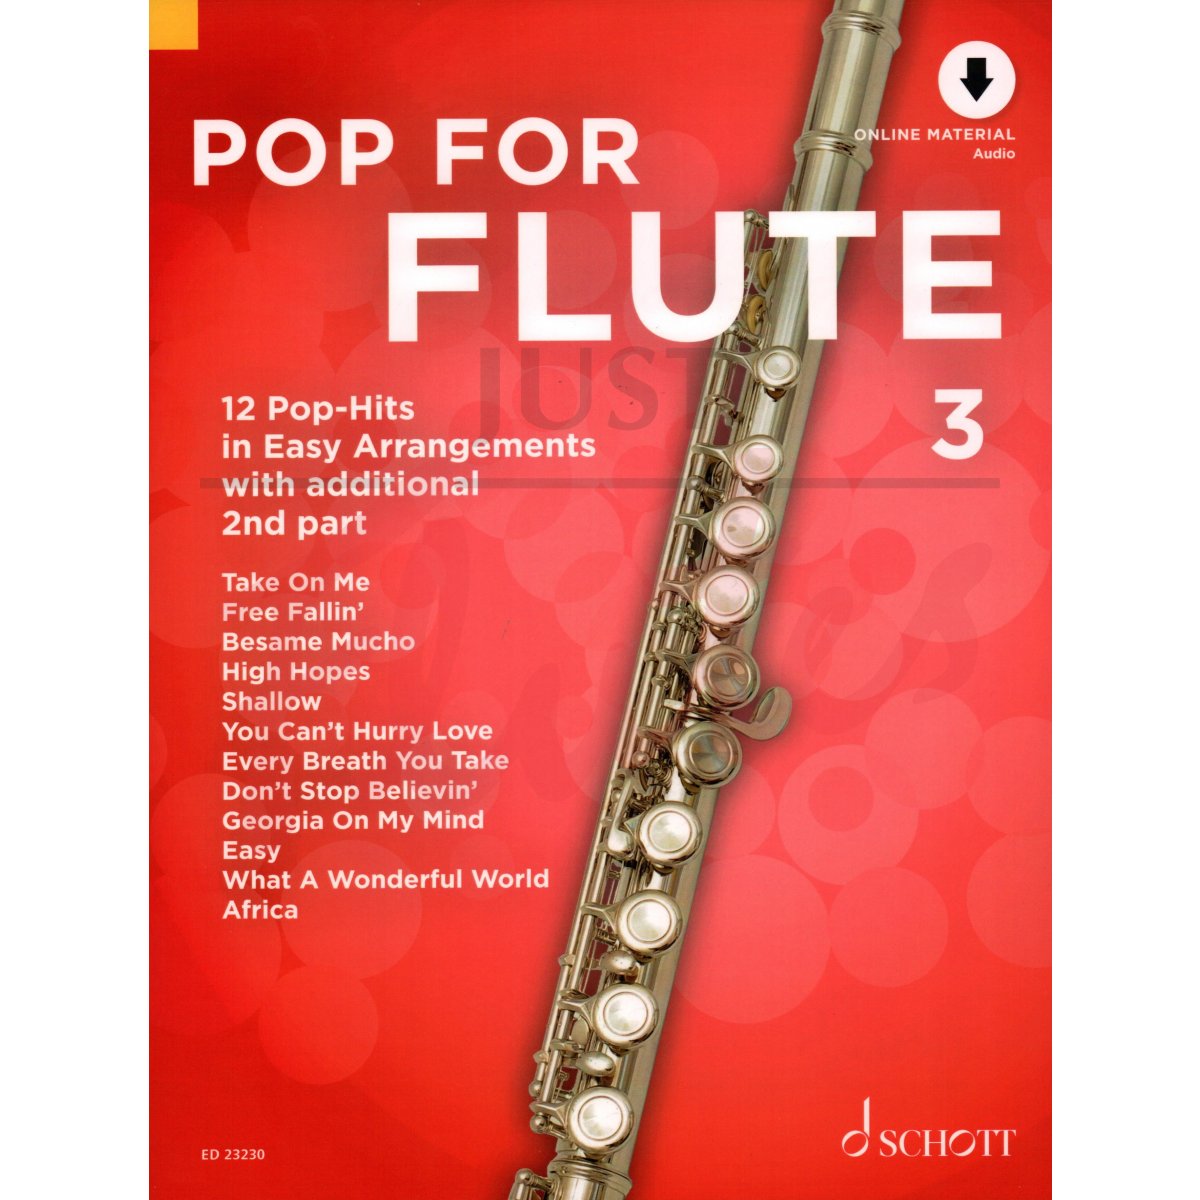 Pop for Flute Book 3 with additional 2nd part